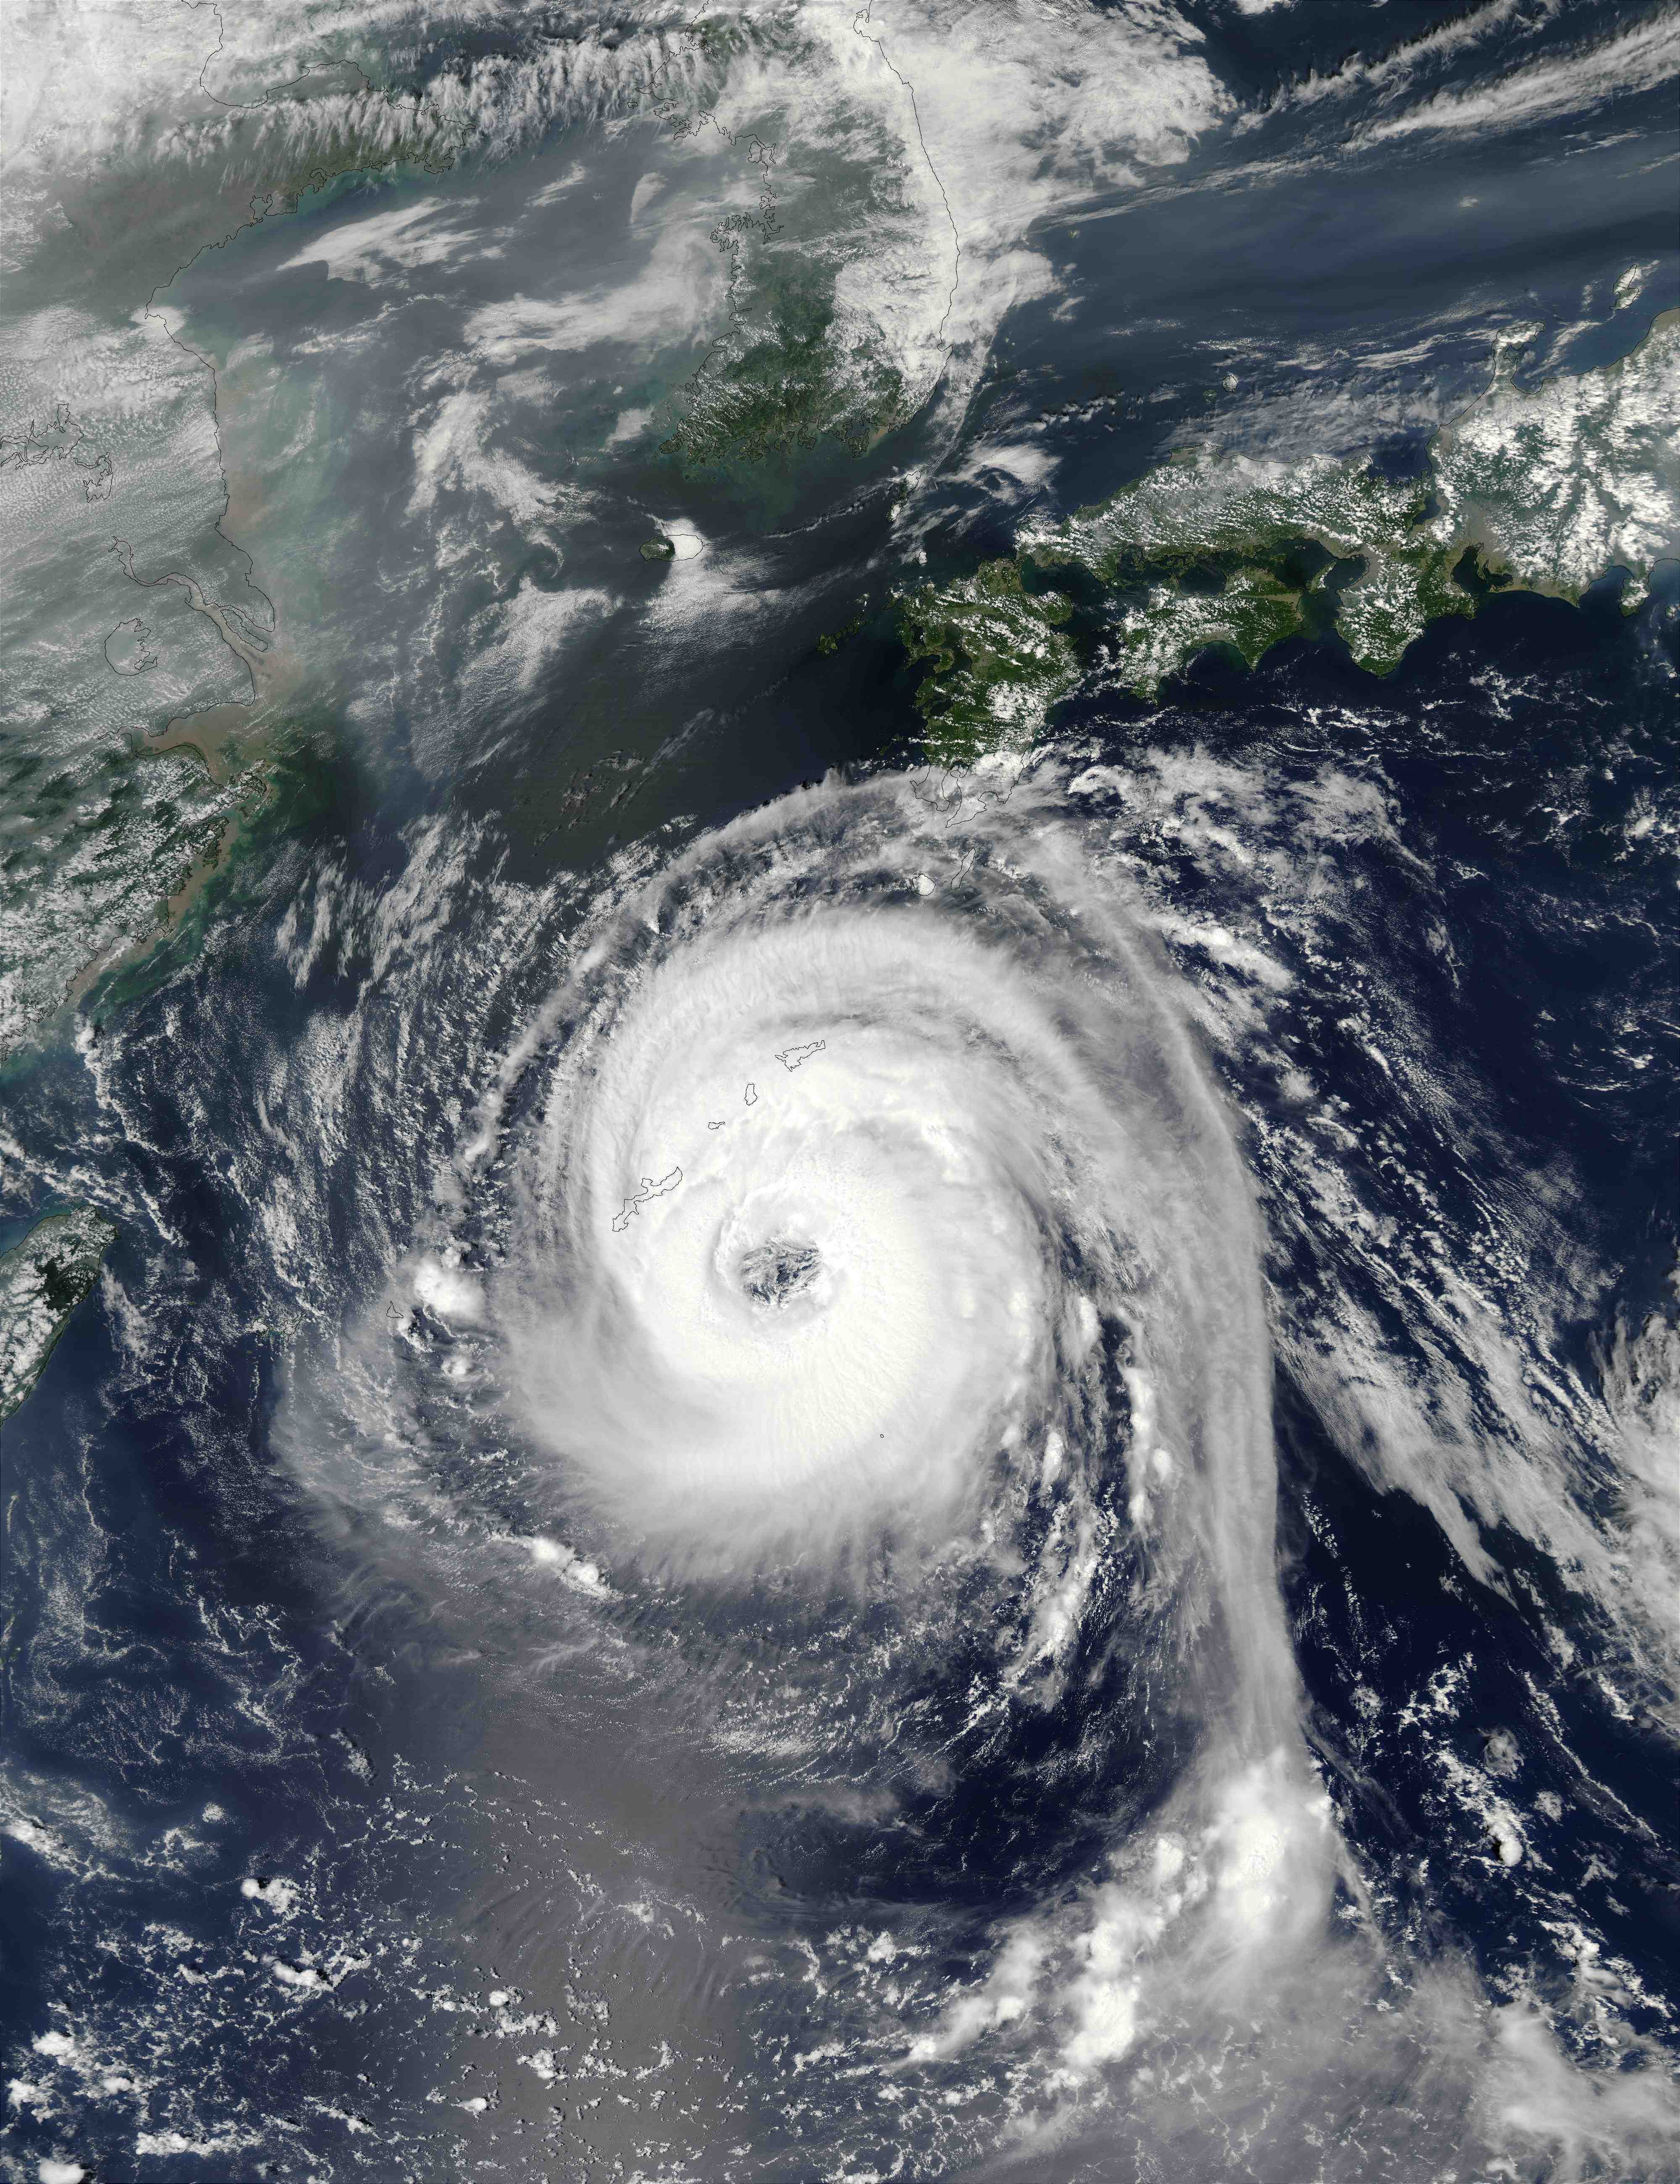 Typhoon Sinlaku weakened to a tropical storm by September 19, 2008 as it continued along Japan's east coast. Sinlaku  is the name of a goddess worshipped on the island of Kosrae in Micronesia, according to the Hong Kong Observatory, which lists tropical cyclone names in use in the Pacific. Photo Credit: NASA JPL